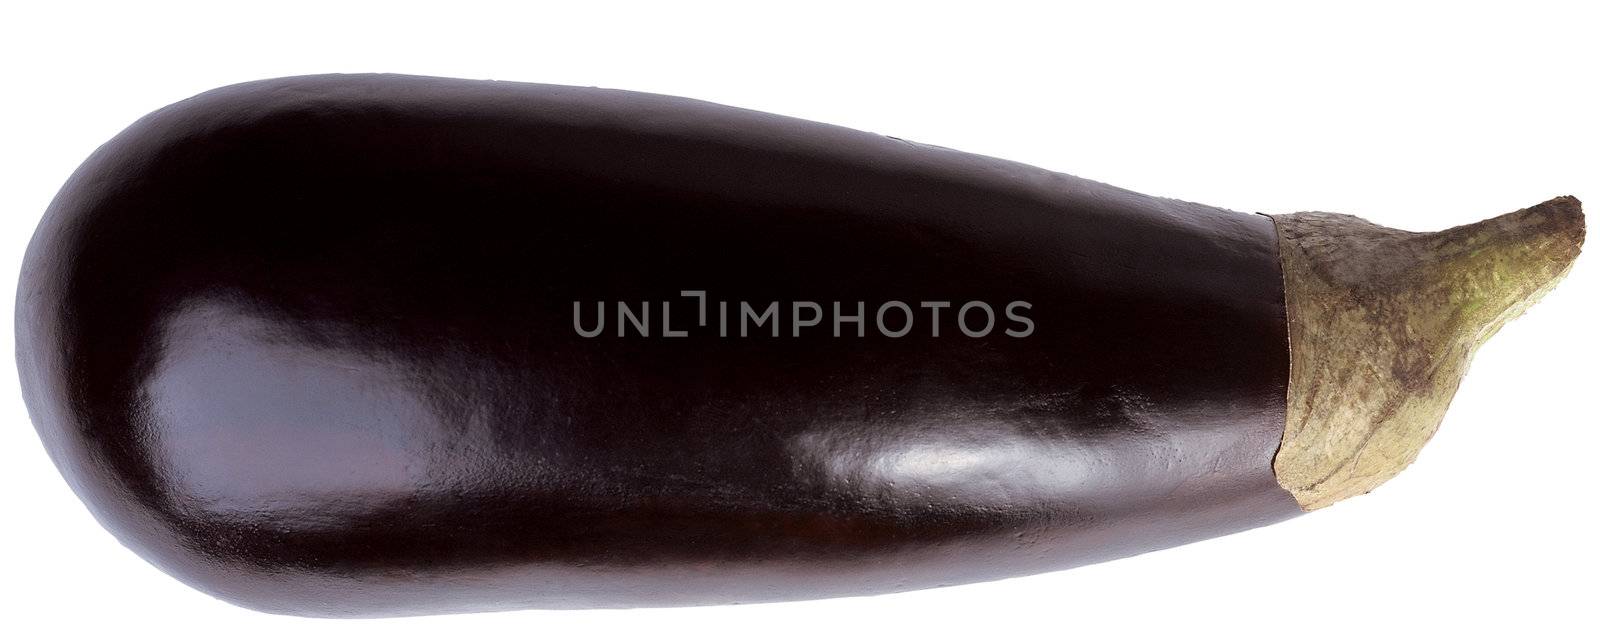 Fine blue eggplant isolated on white by ozaiachin